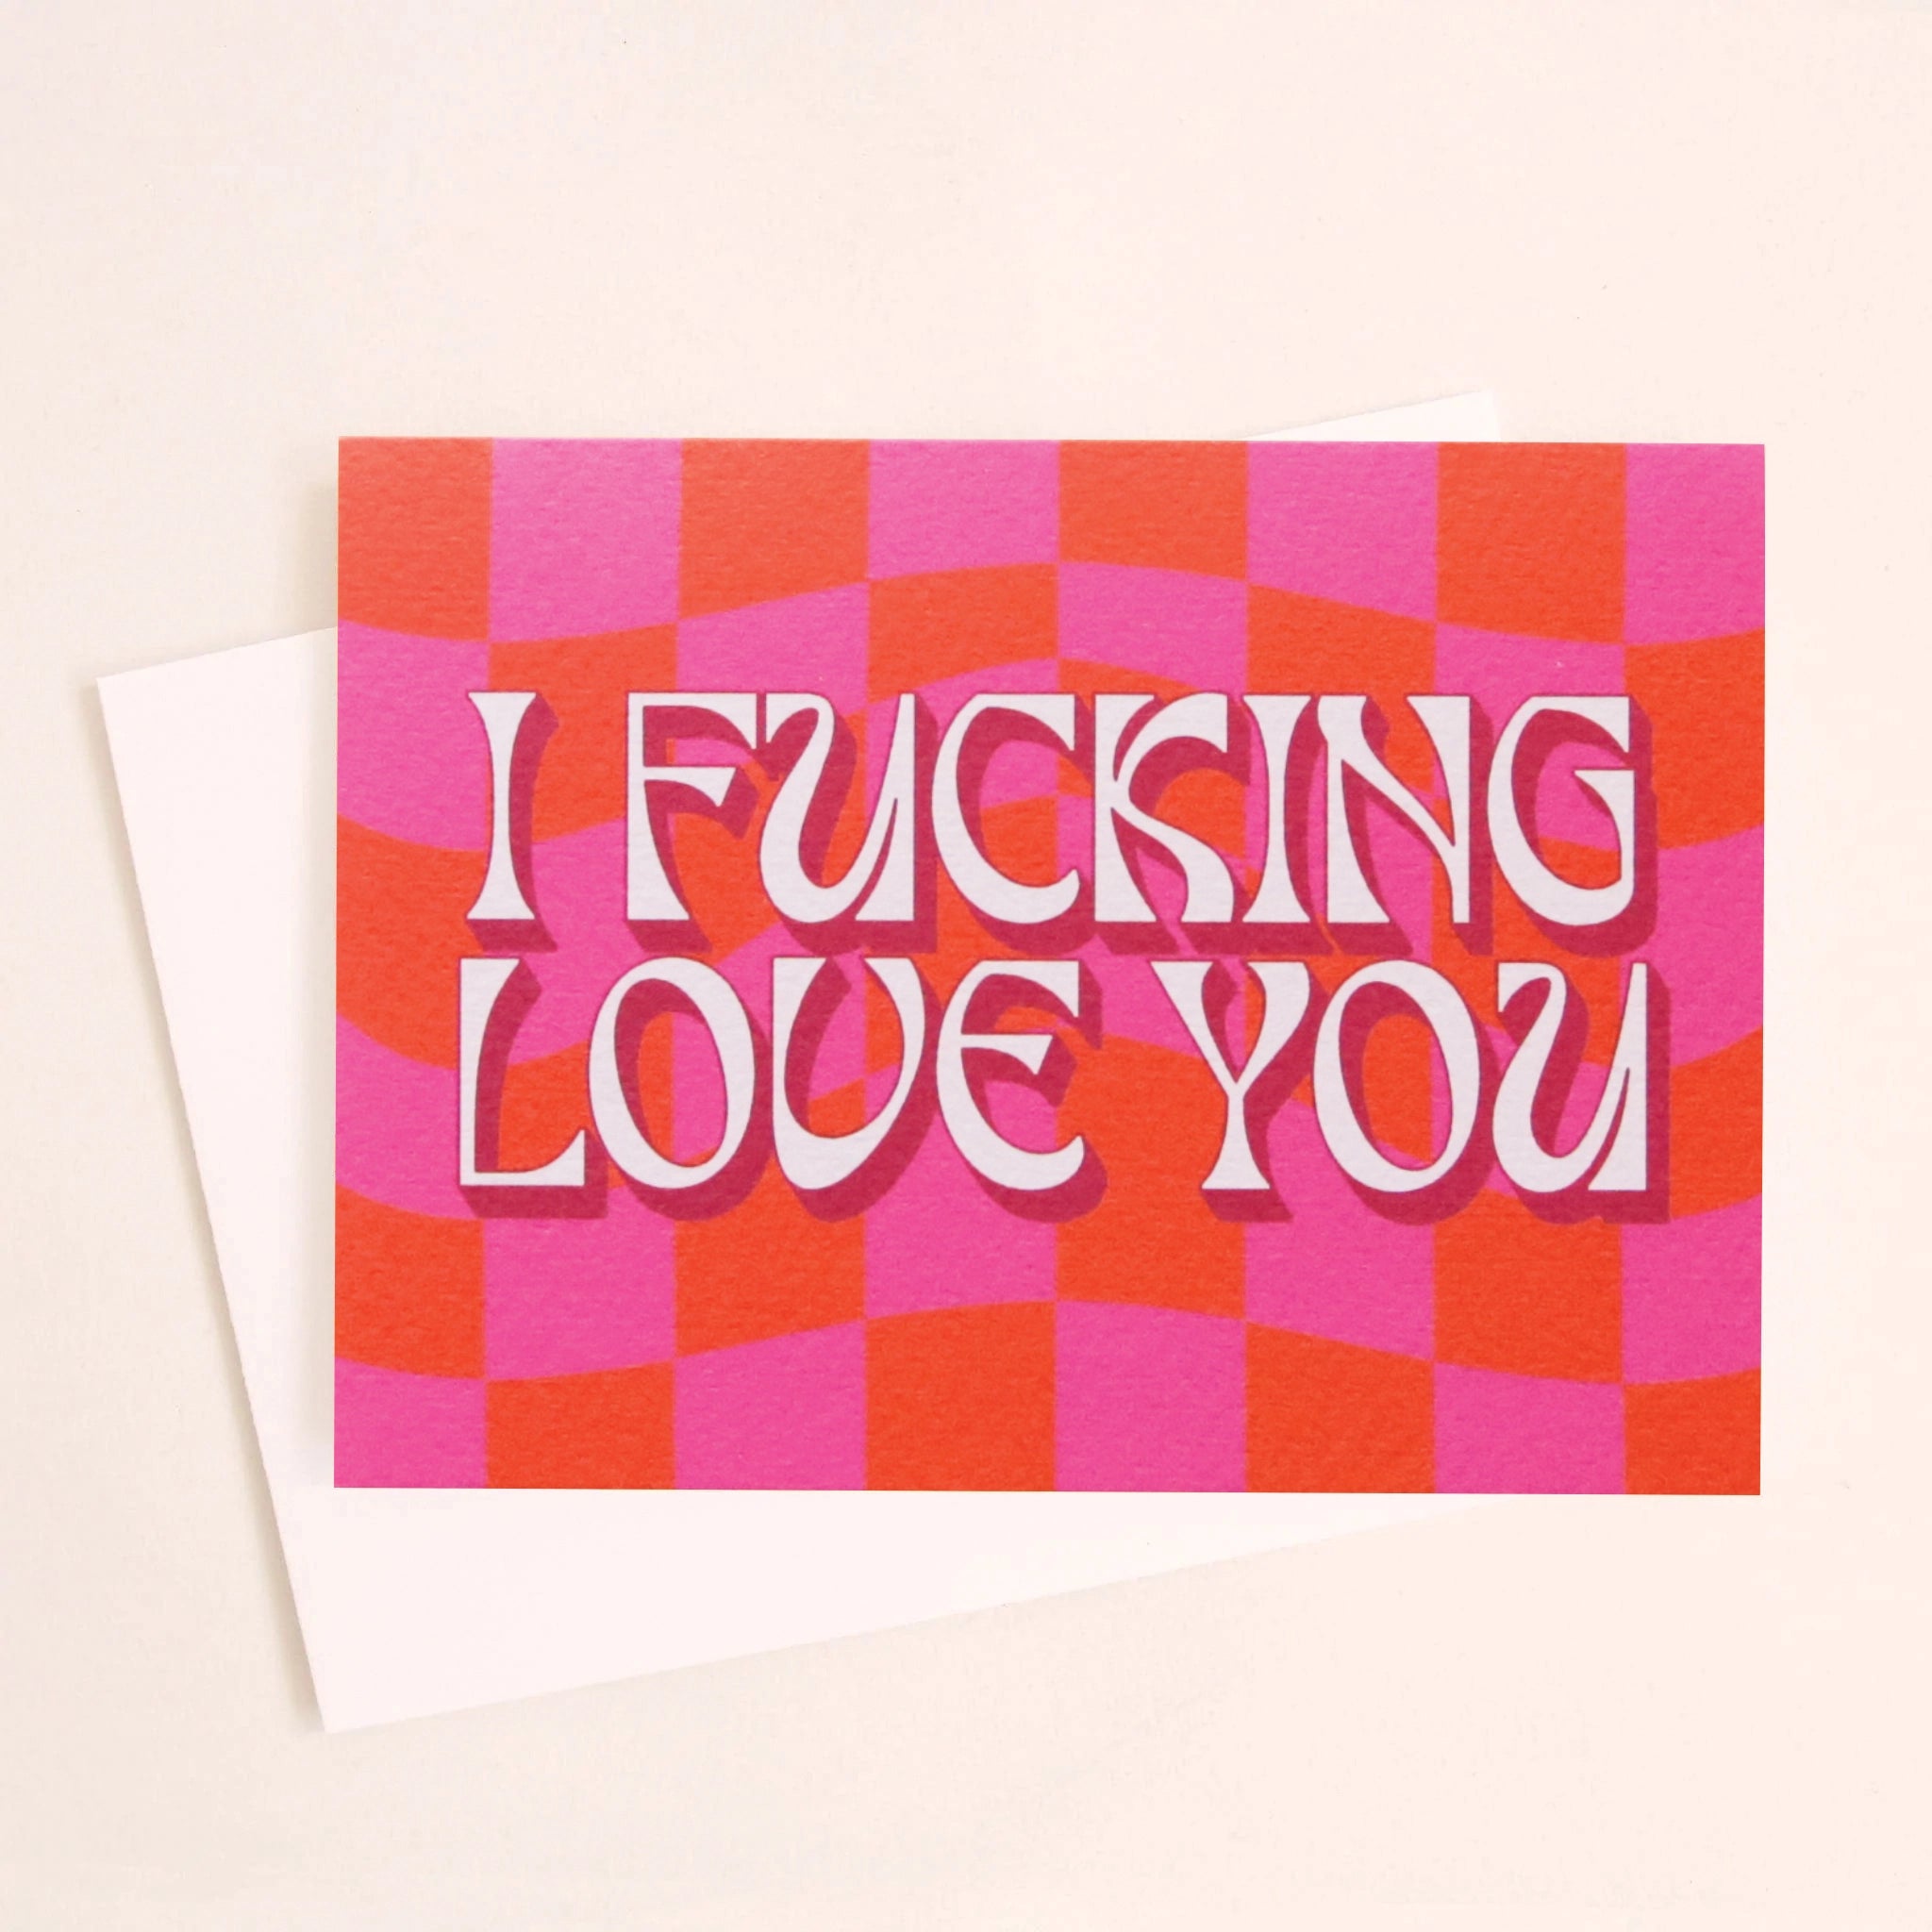 On a white background is a hot pink and red greeting card what reads, &quot;I Fucking Love You&quot; in light pink letters, and photographed with the coordinating white envelope. 